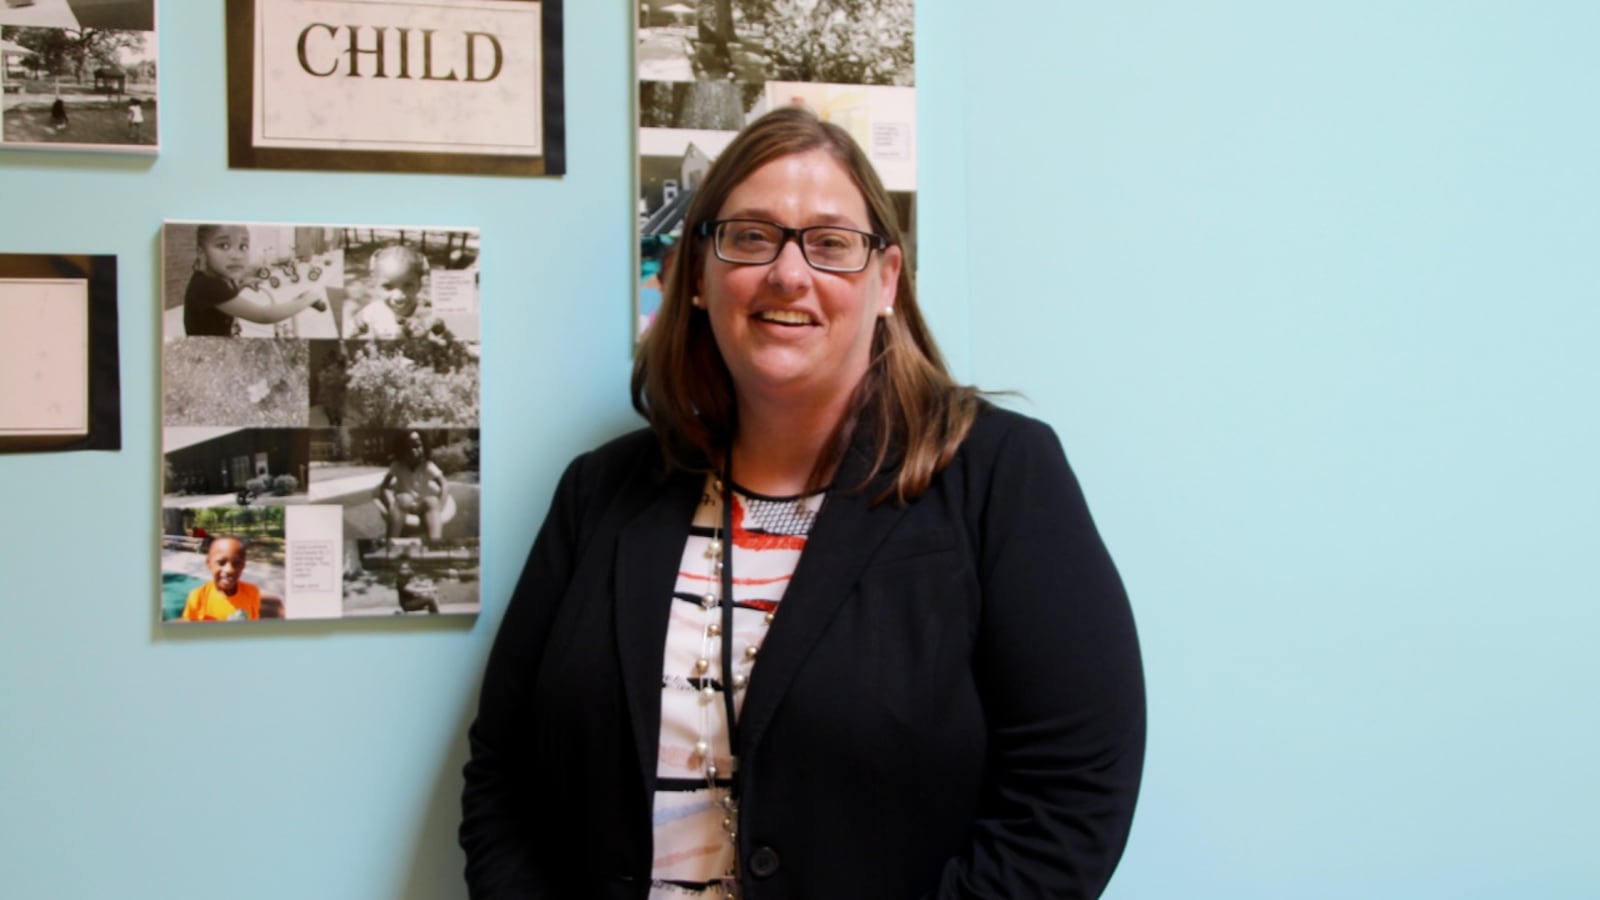 Kelley Nichols is the vice-president of teacher excellence at Porter-Leath and will help lead the Teacher Excellence Program, a year-old training strategy to boost the quality of early education instruction in Memphis through mentoring and coaching.